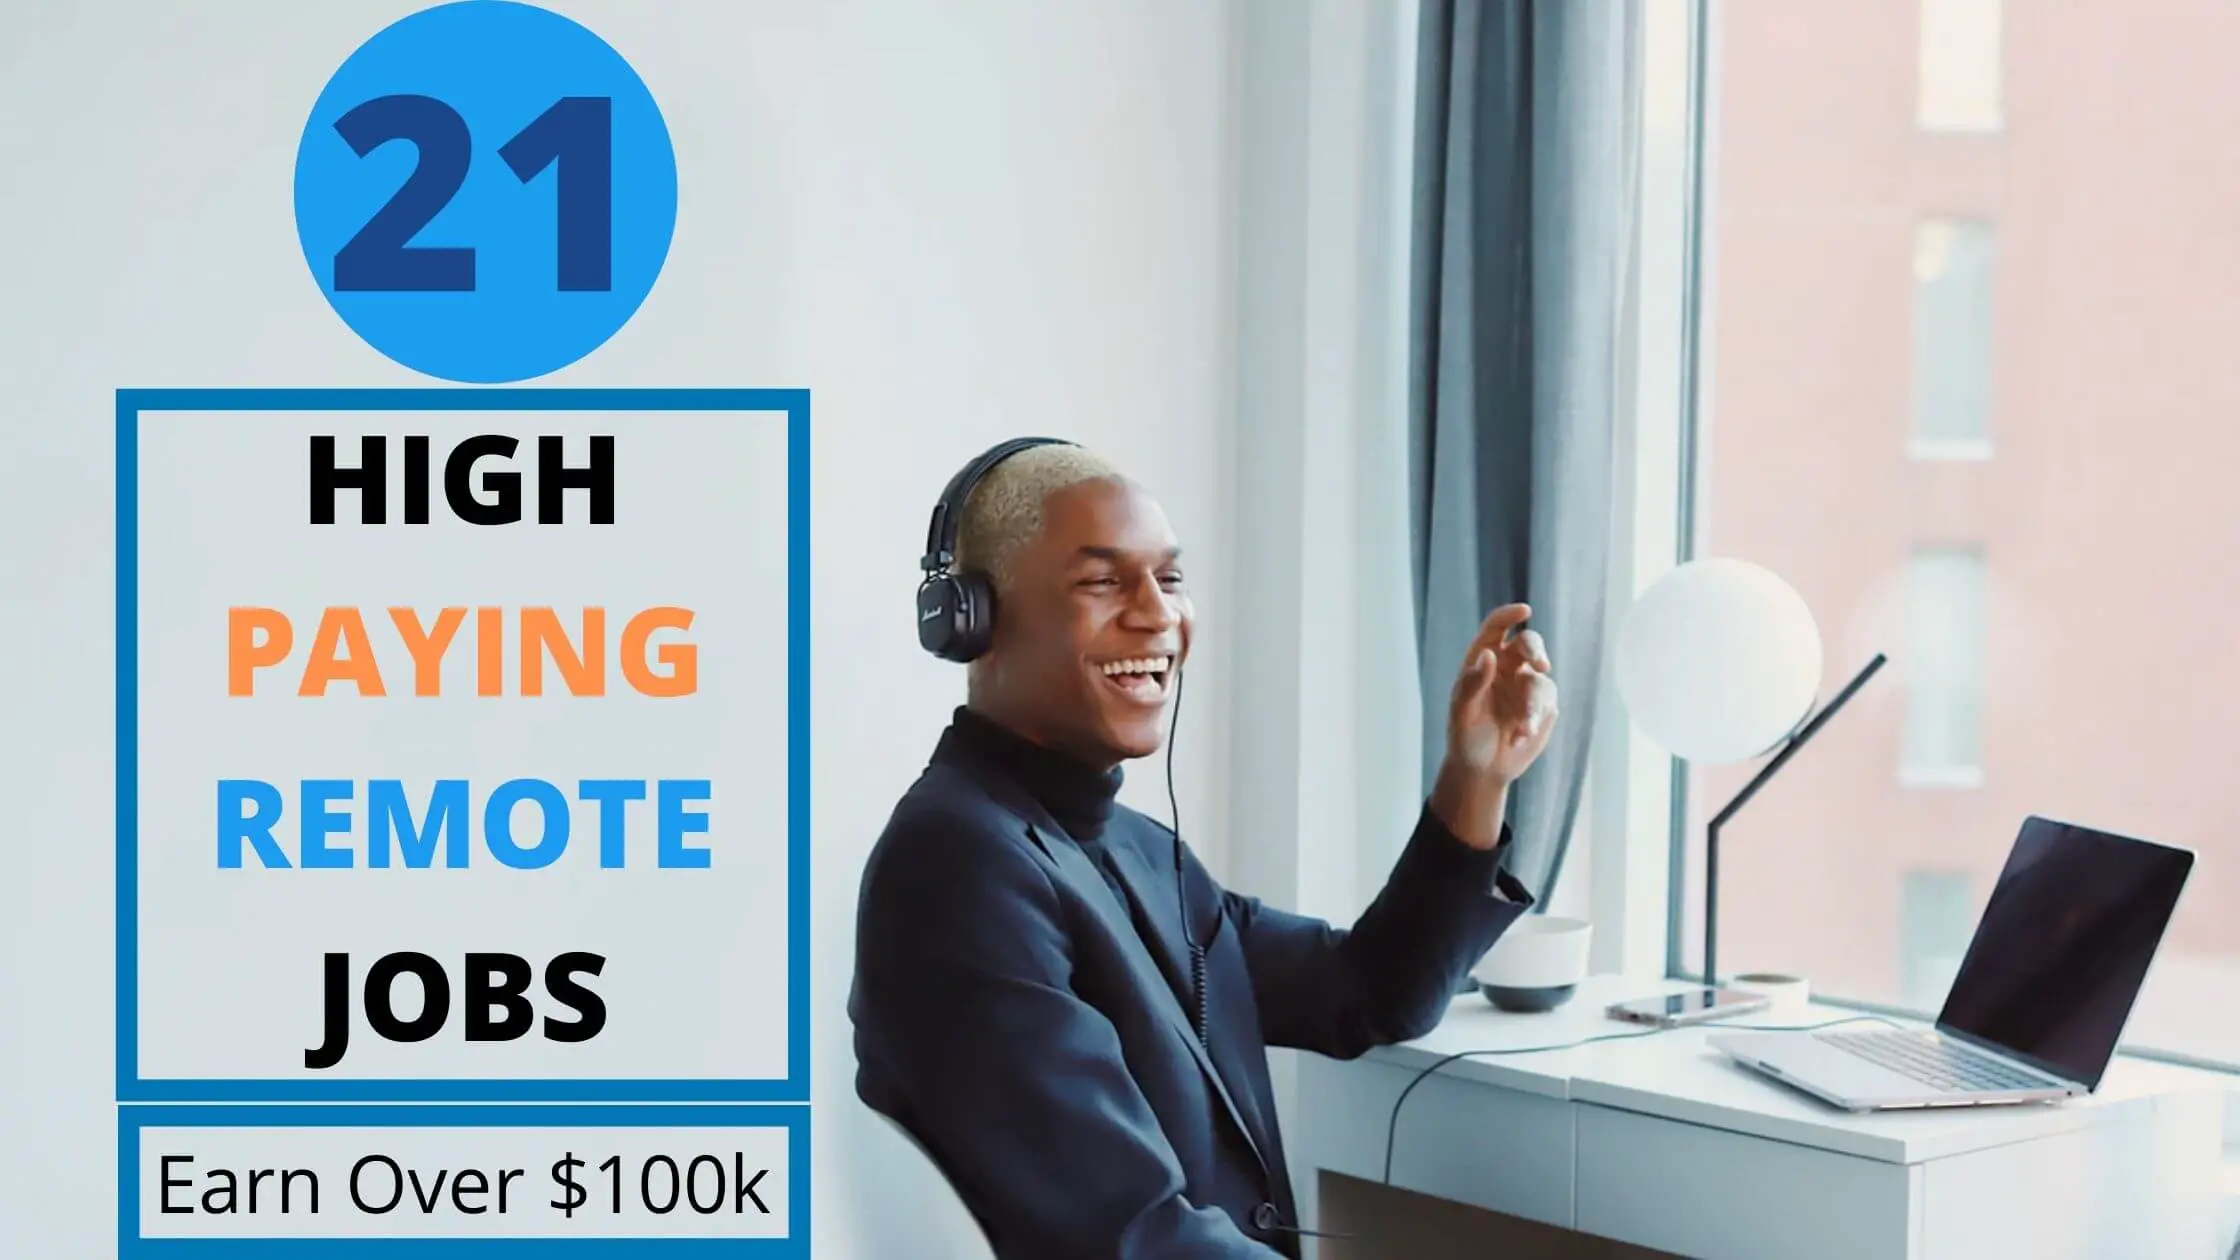 High paying remote jobs